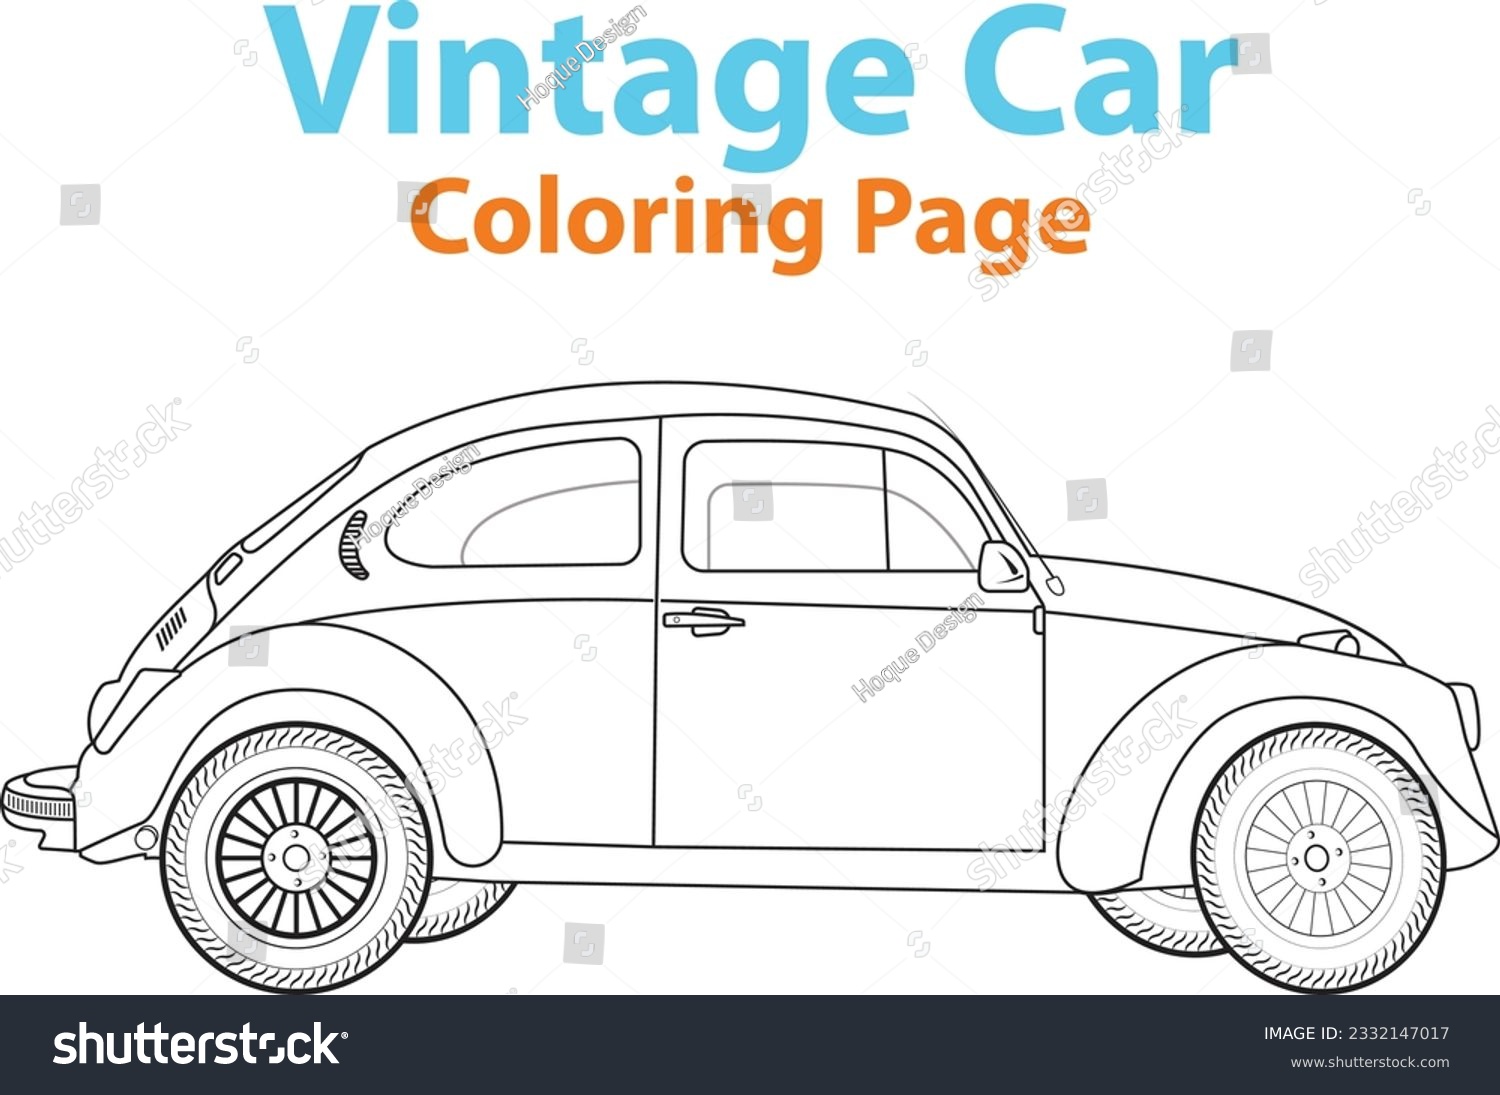 Vintage car coloring pages illustration stock vector royalty free